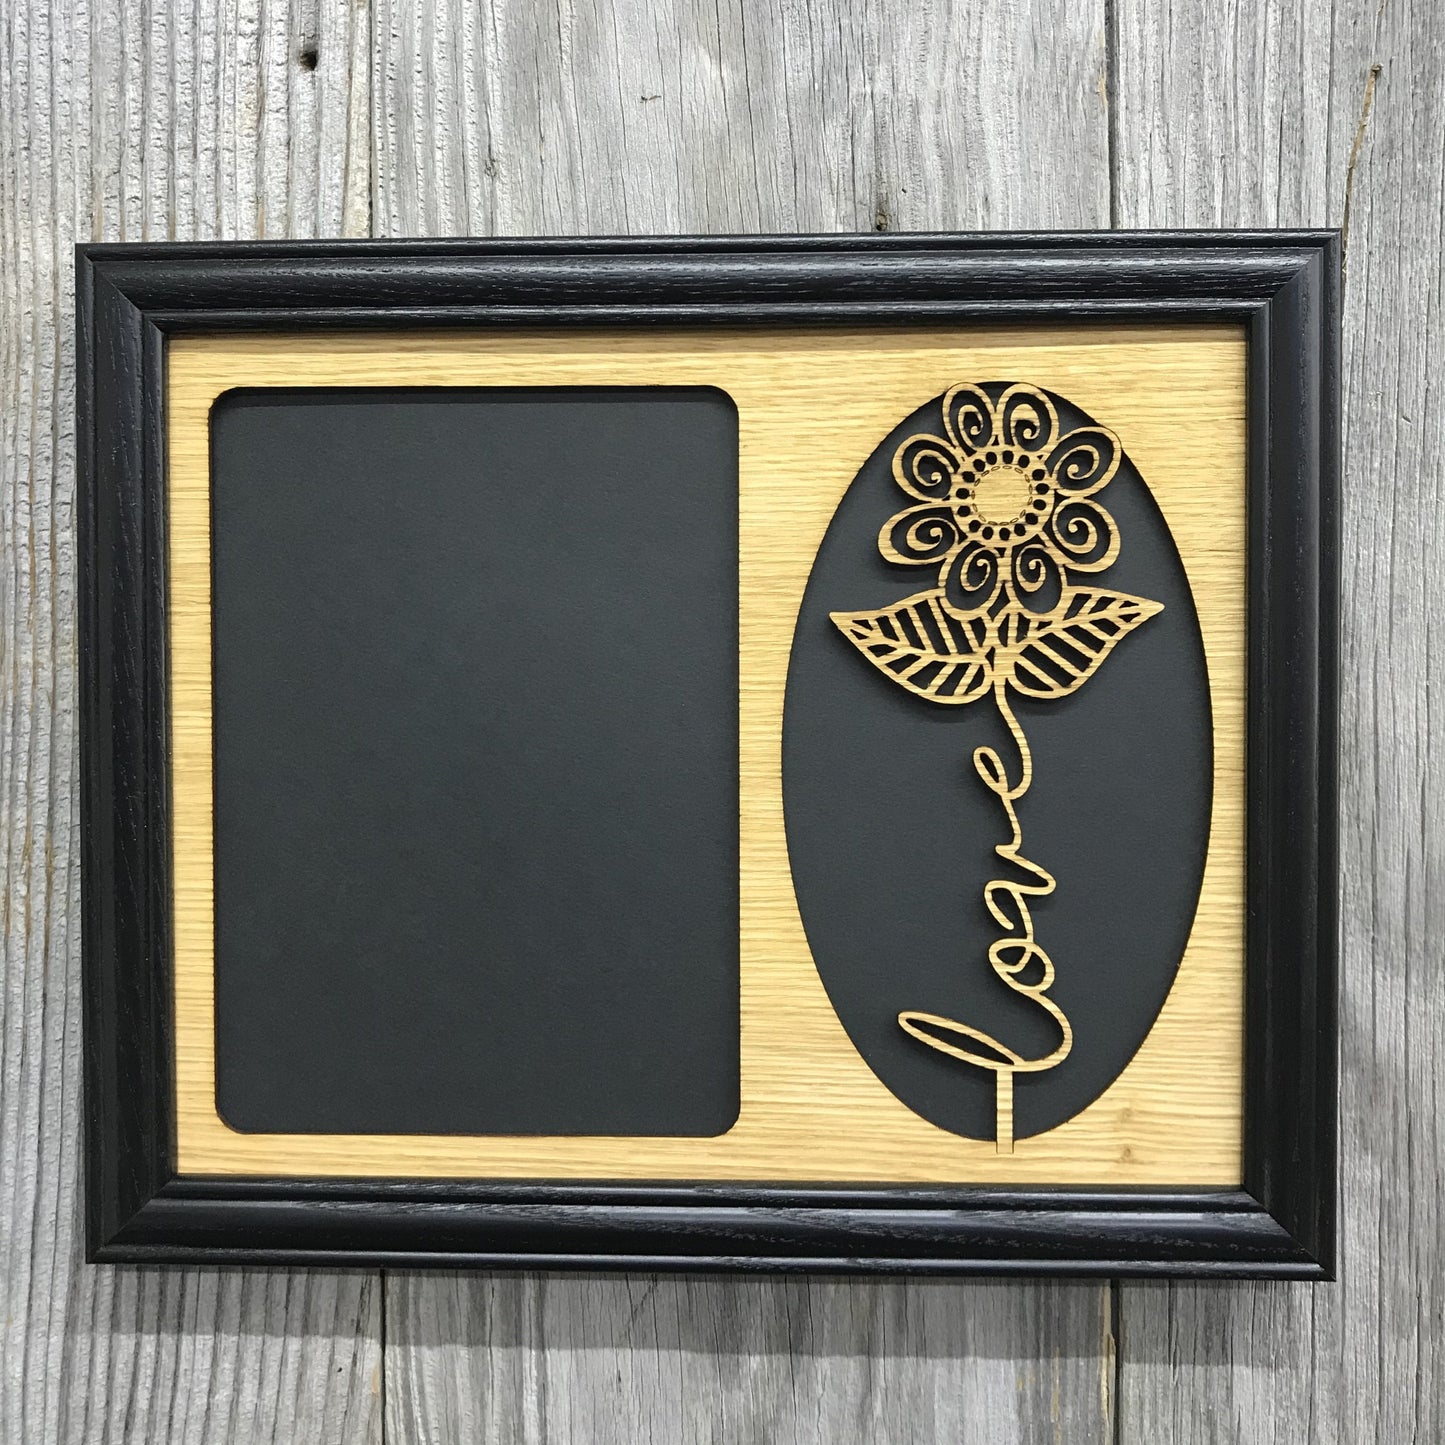 Word Flower Picture Frame - 8x10 Frame Holds 5x7 Photo